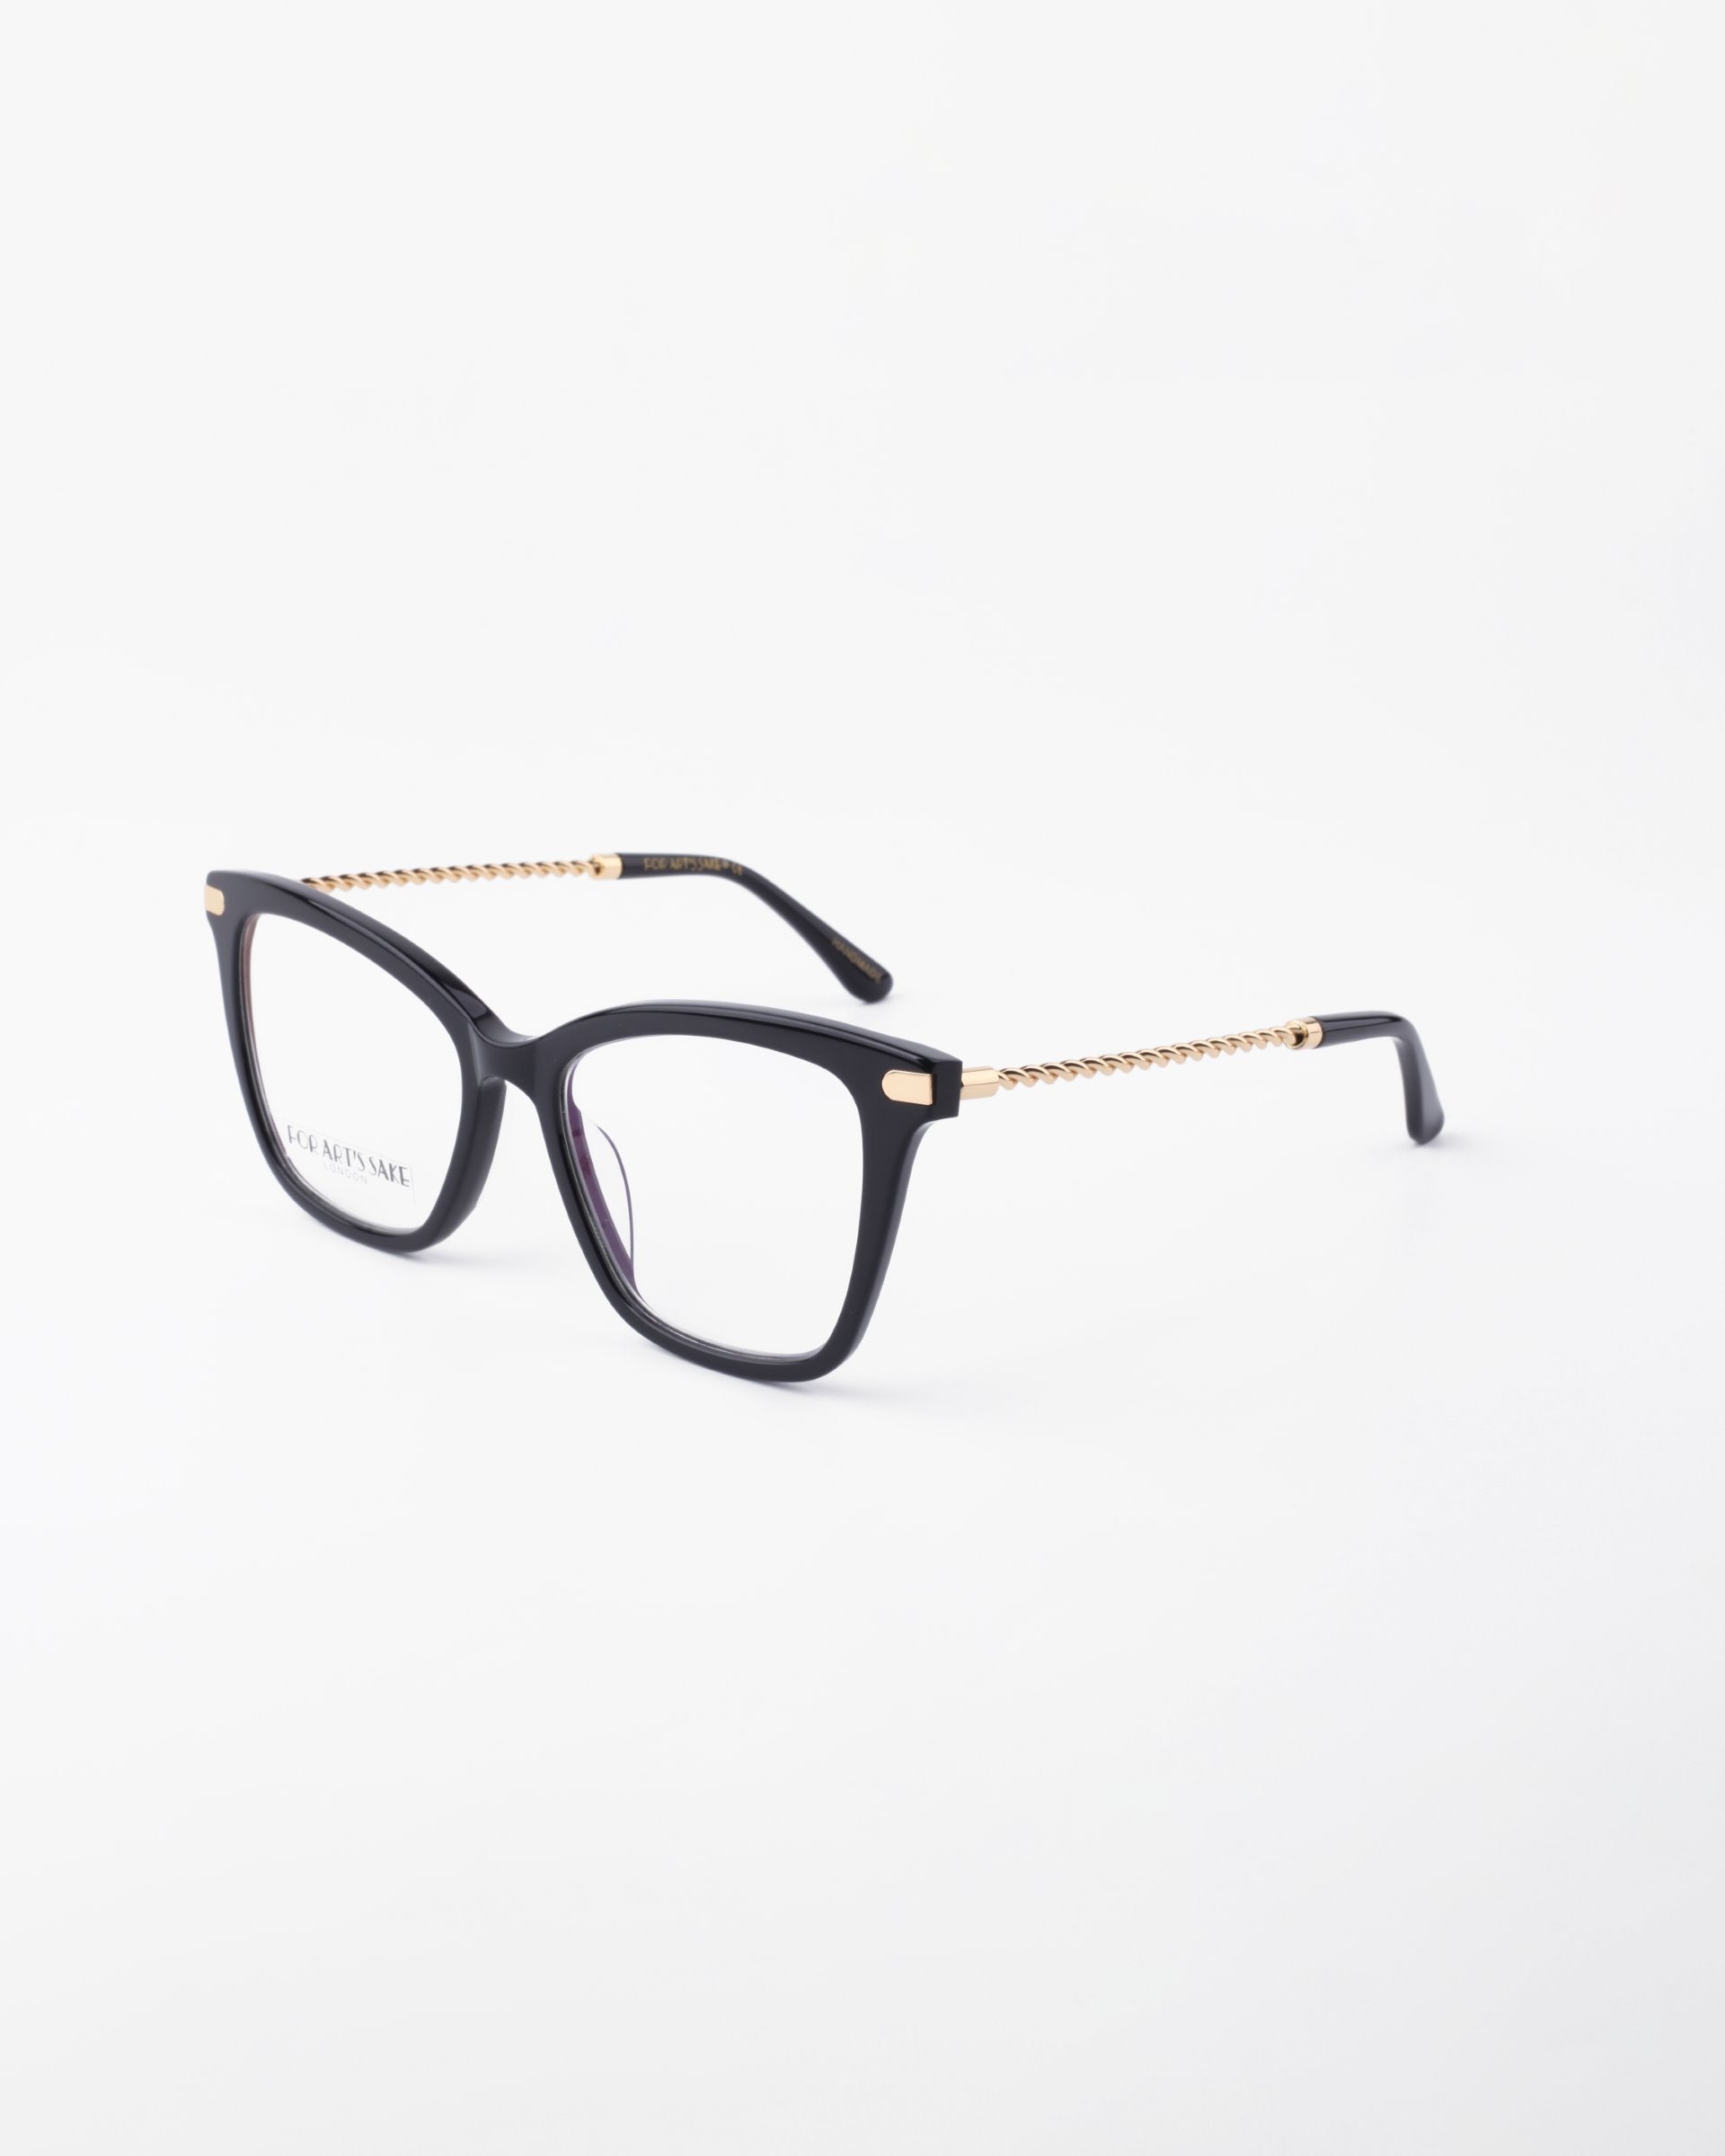 A pair of For Art's Sake® Paris Two black framed glasses with gold accents and chain-like details on the temples are positioned against a plain white background. The lenses, featuring a blue light filter, are clear, and the overall design is modern and stylish.